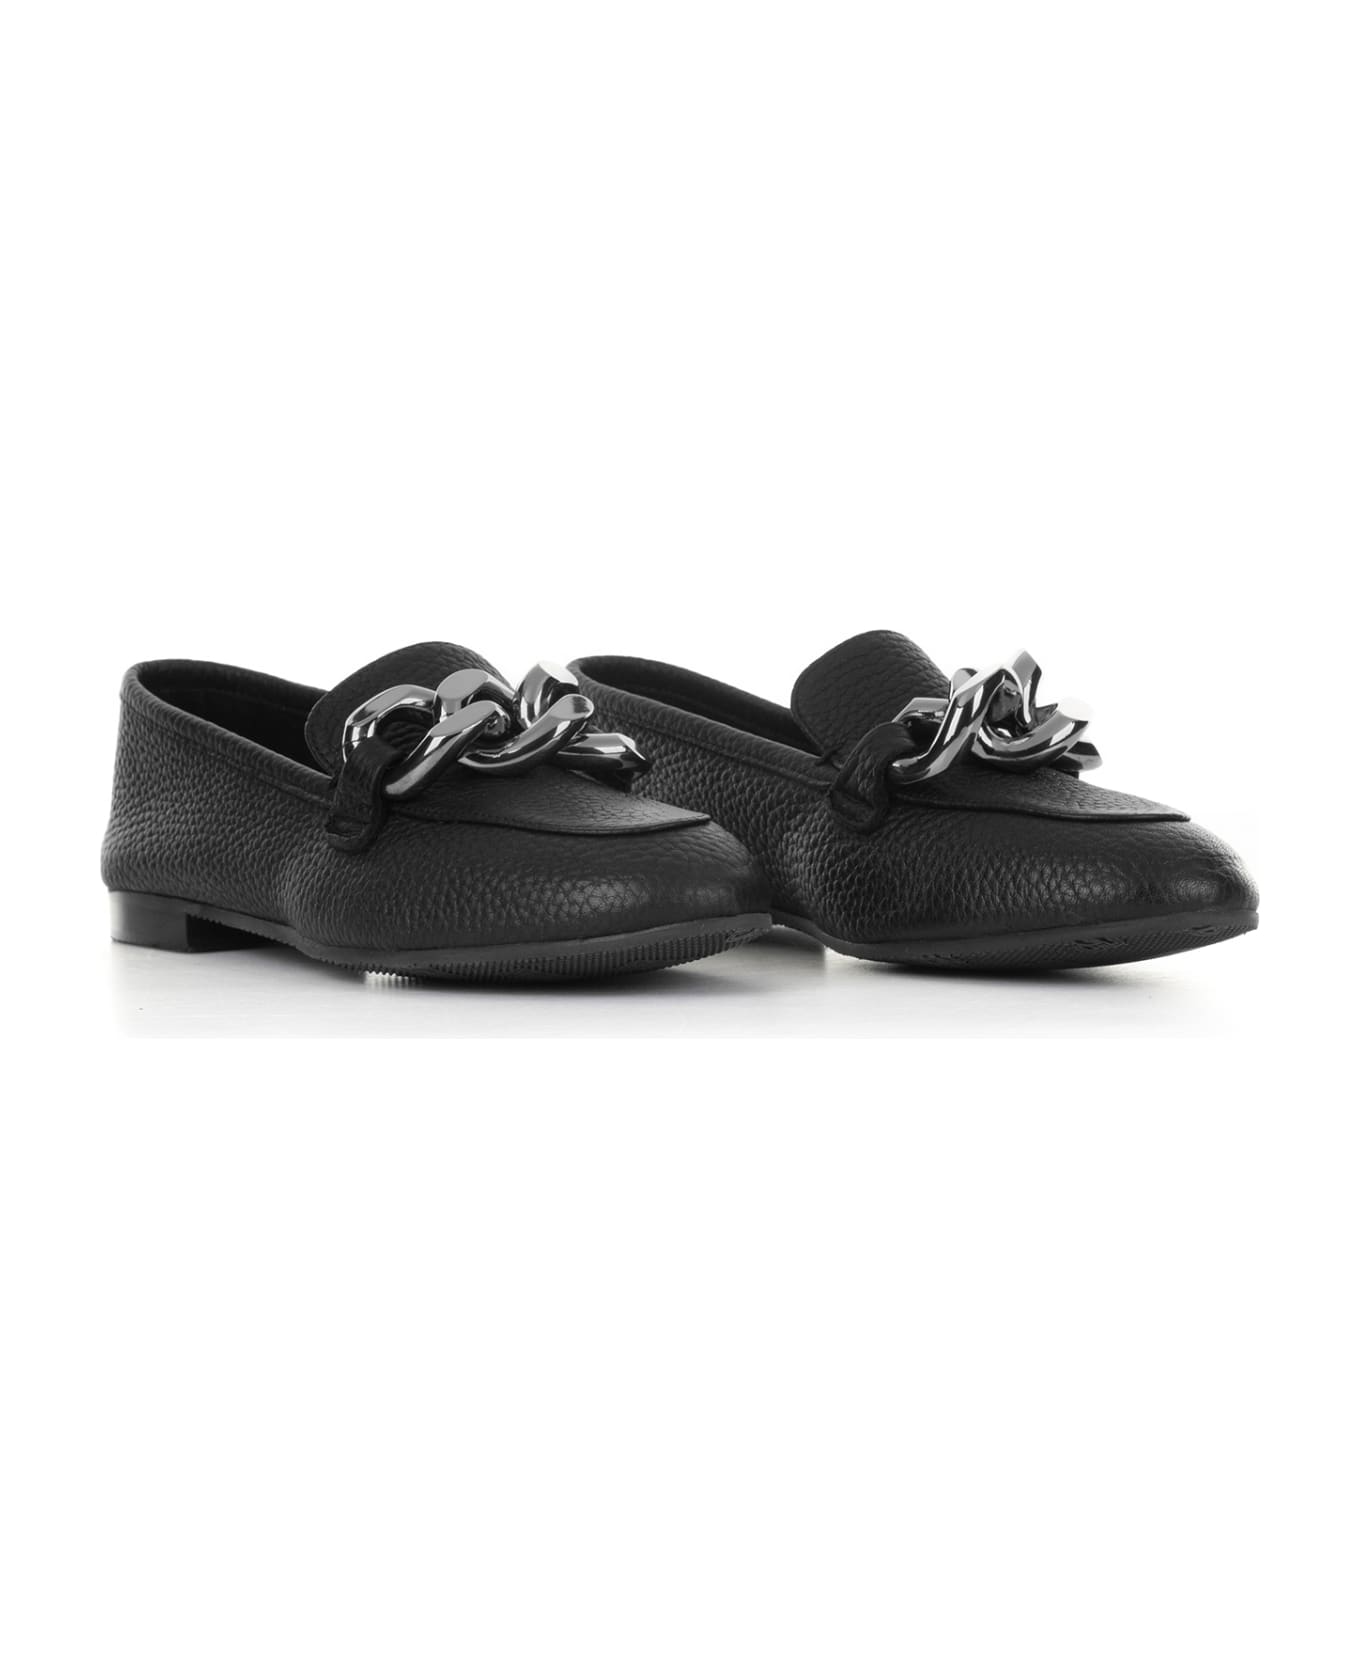 Casadei Hammered Leather Moccasin With Chain - NERO フラットシューズ